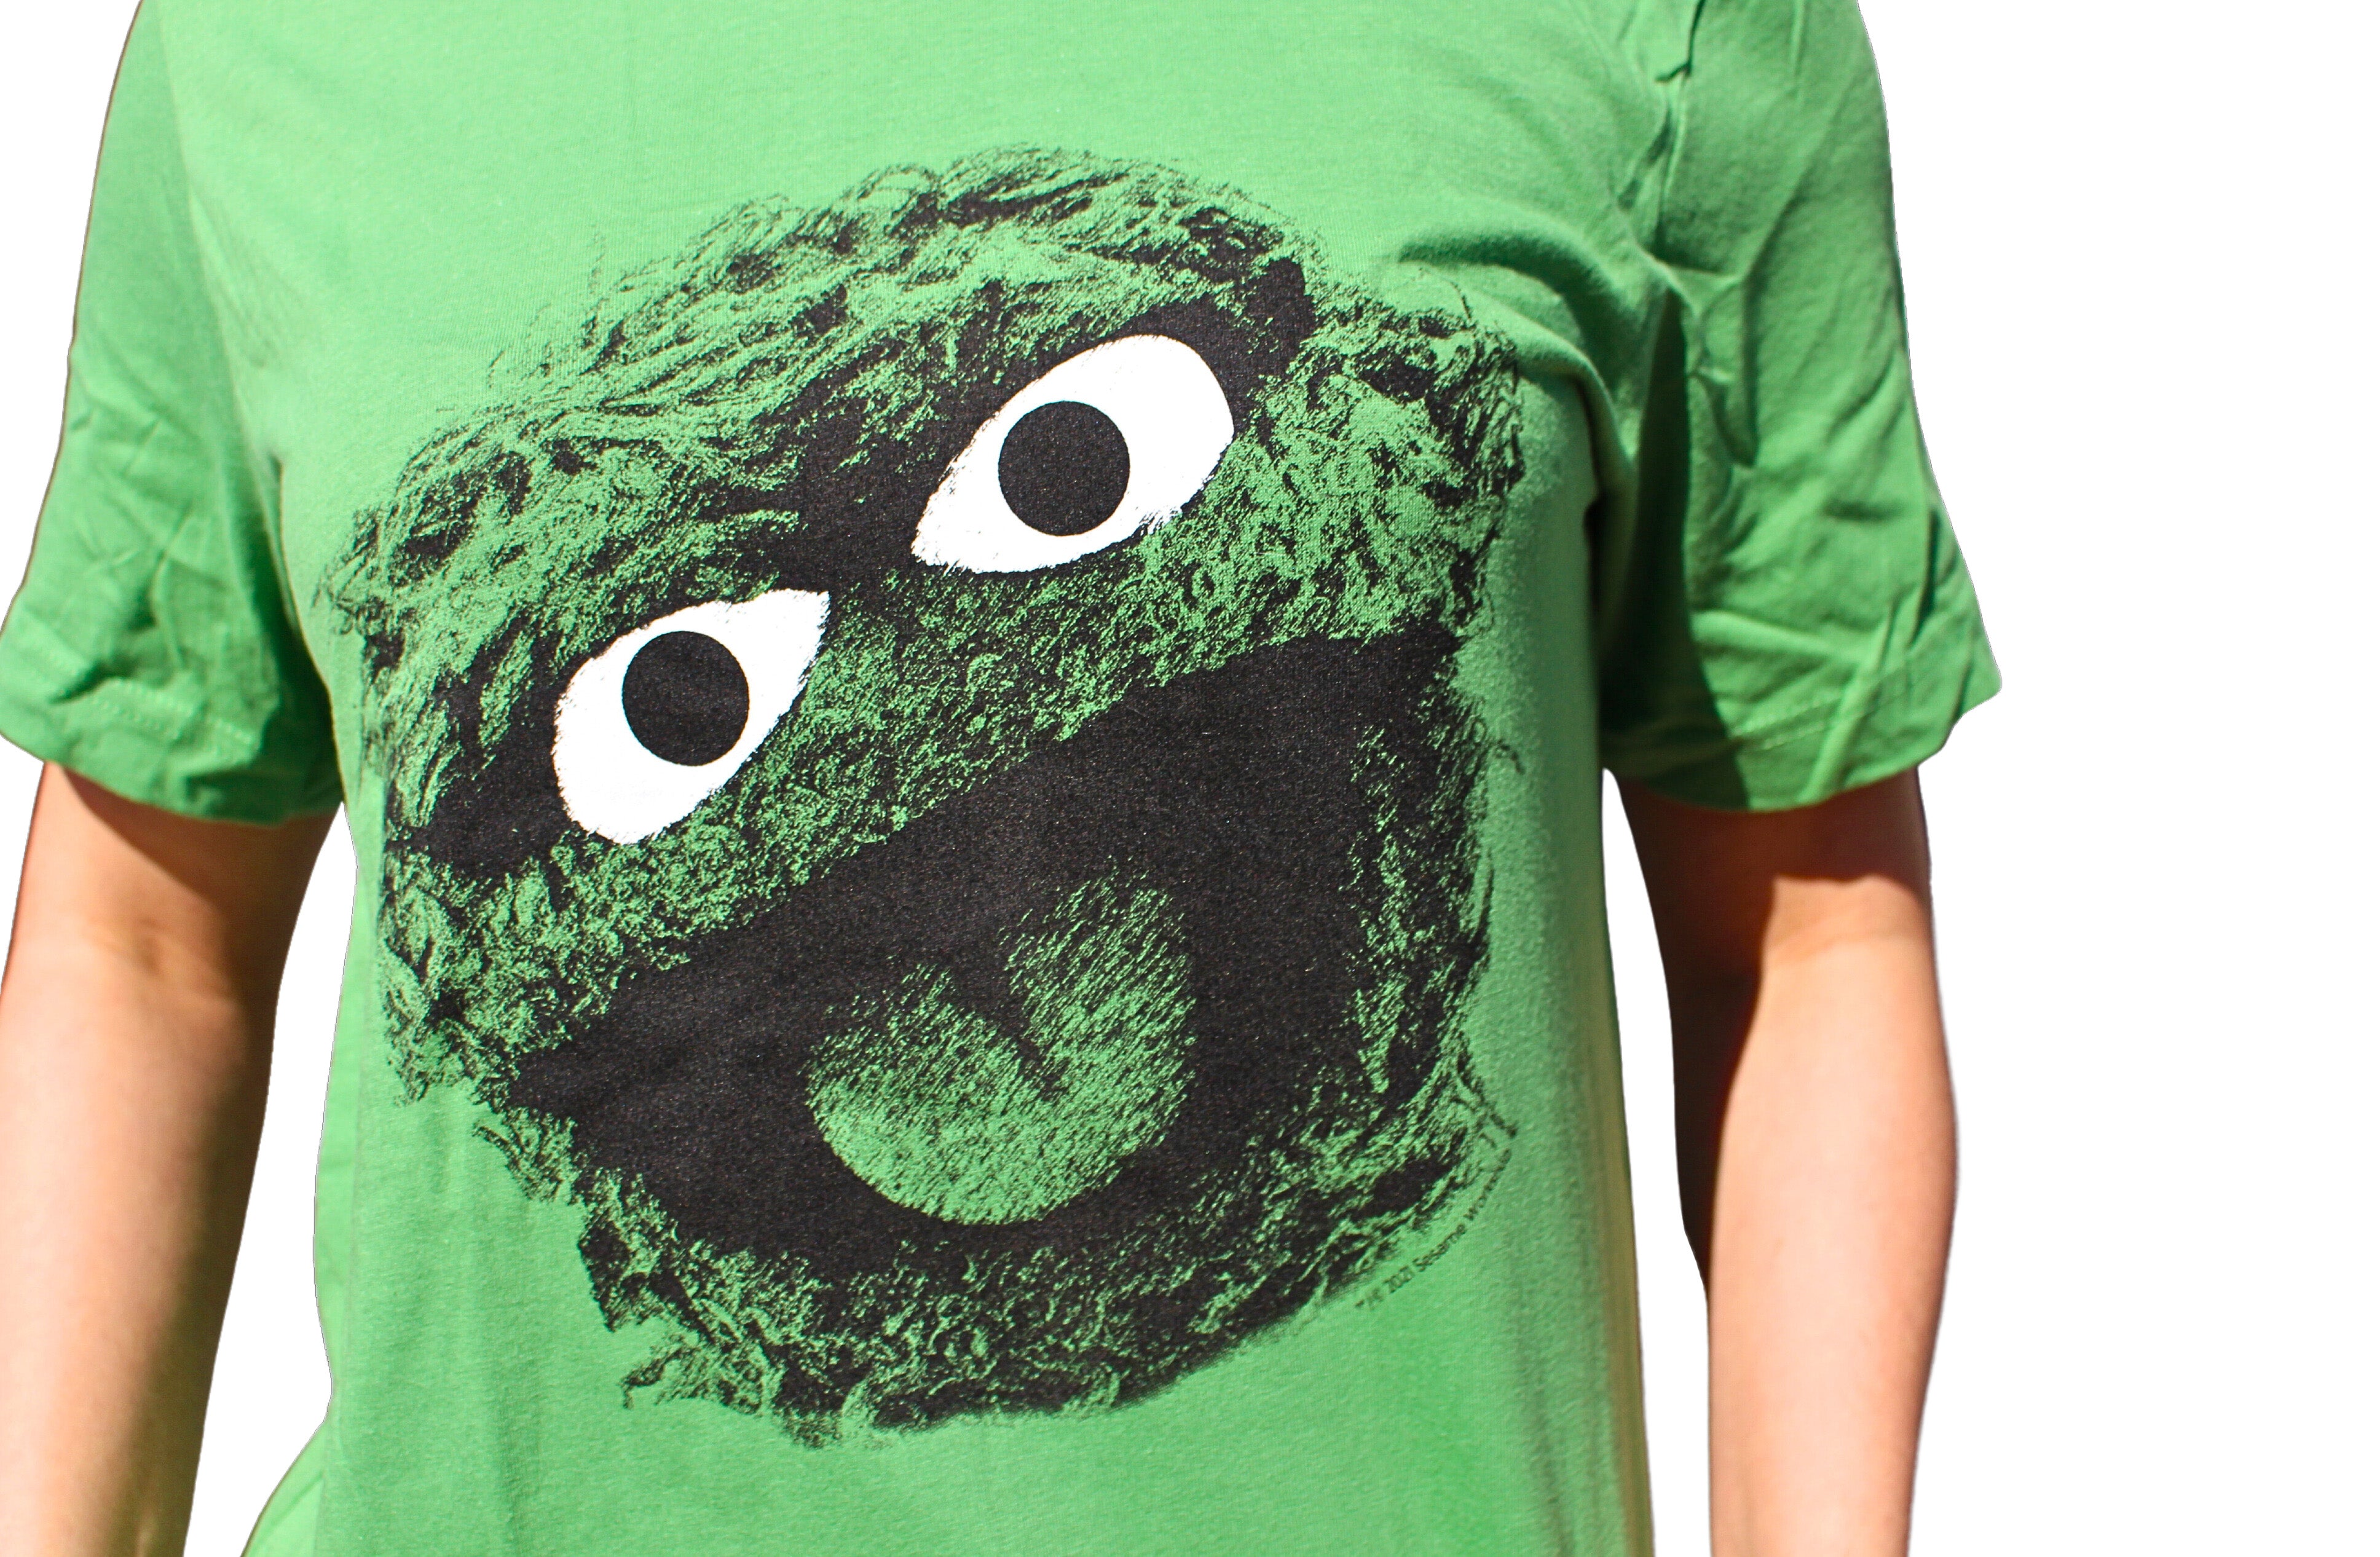 Sesame Street Oscar The Grouch shirt on model front view close up